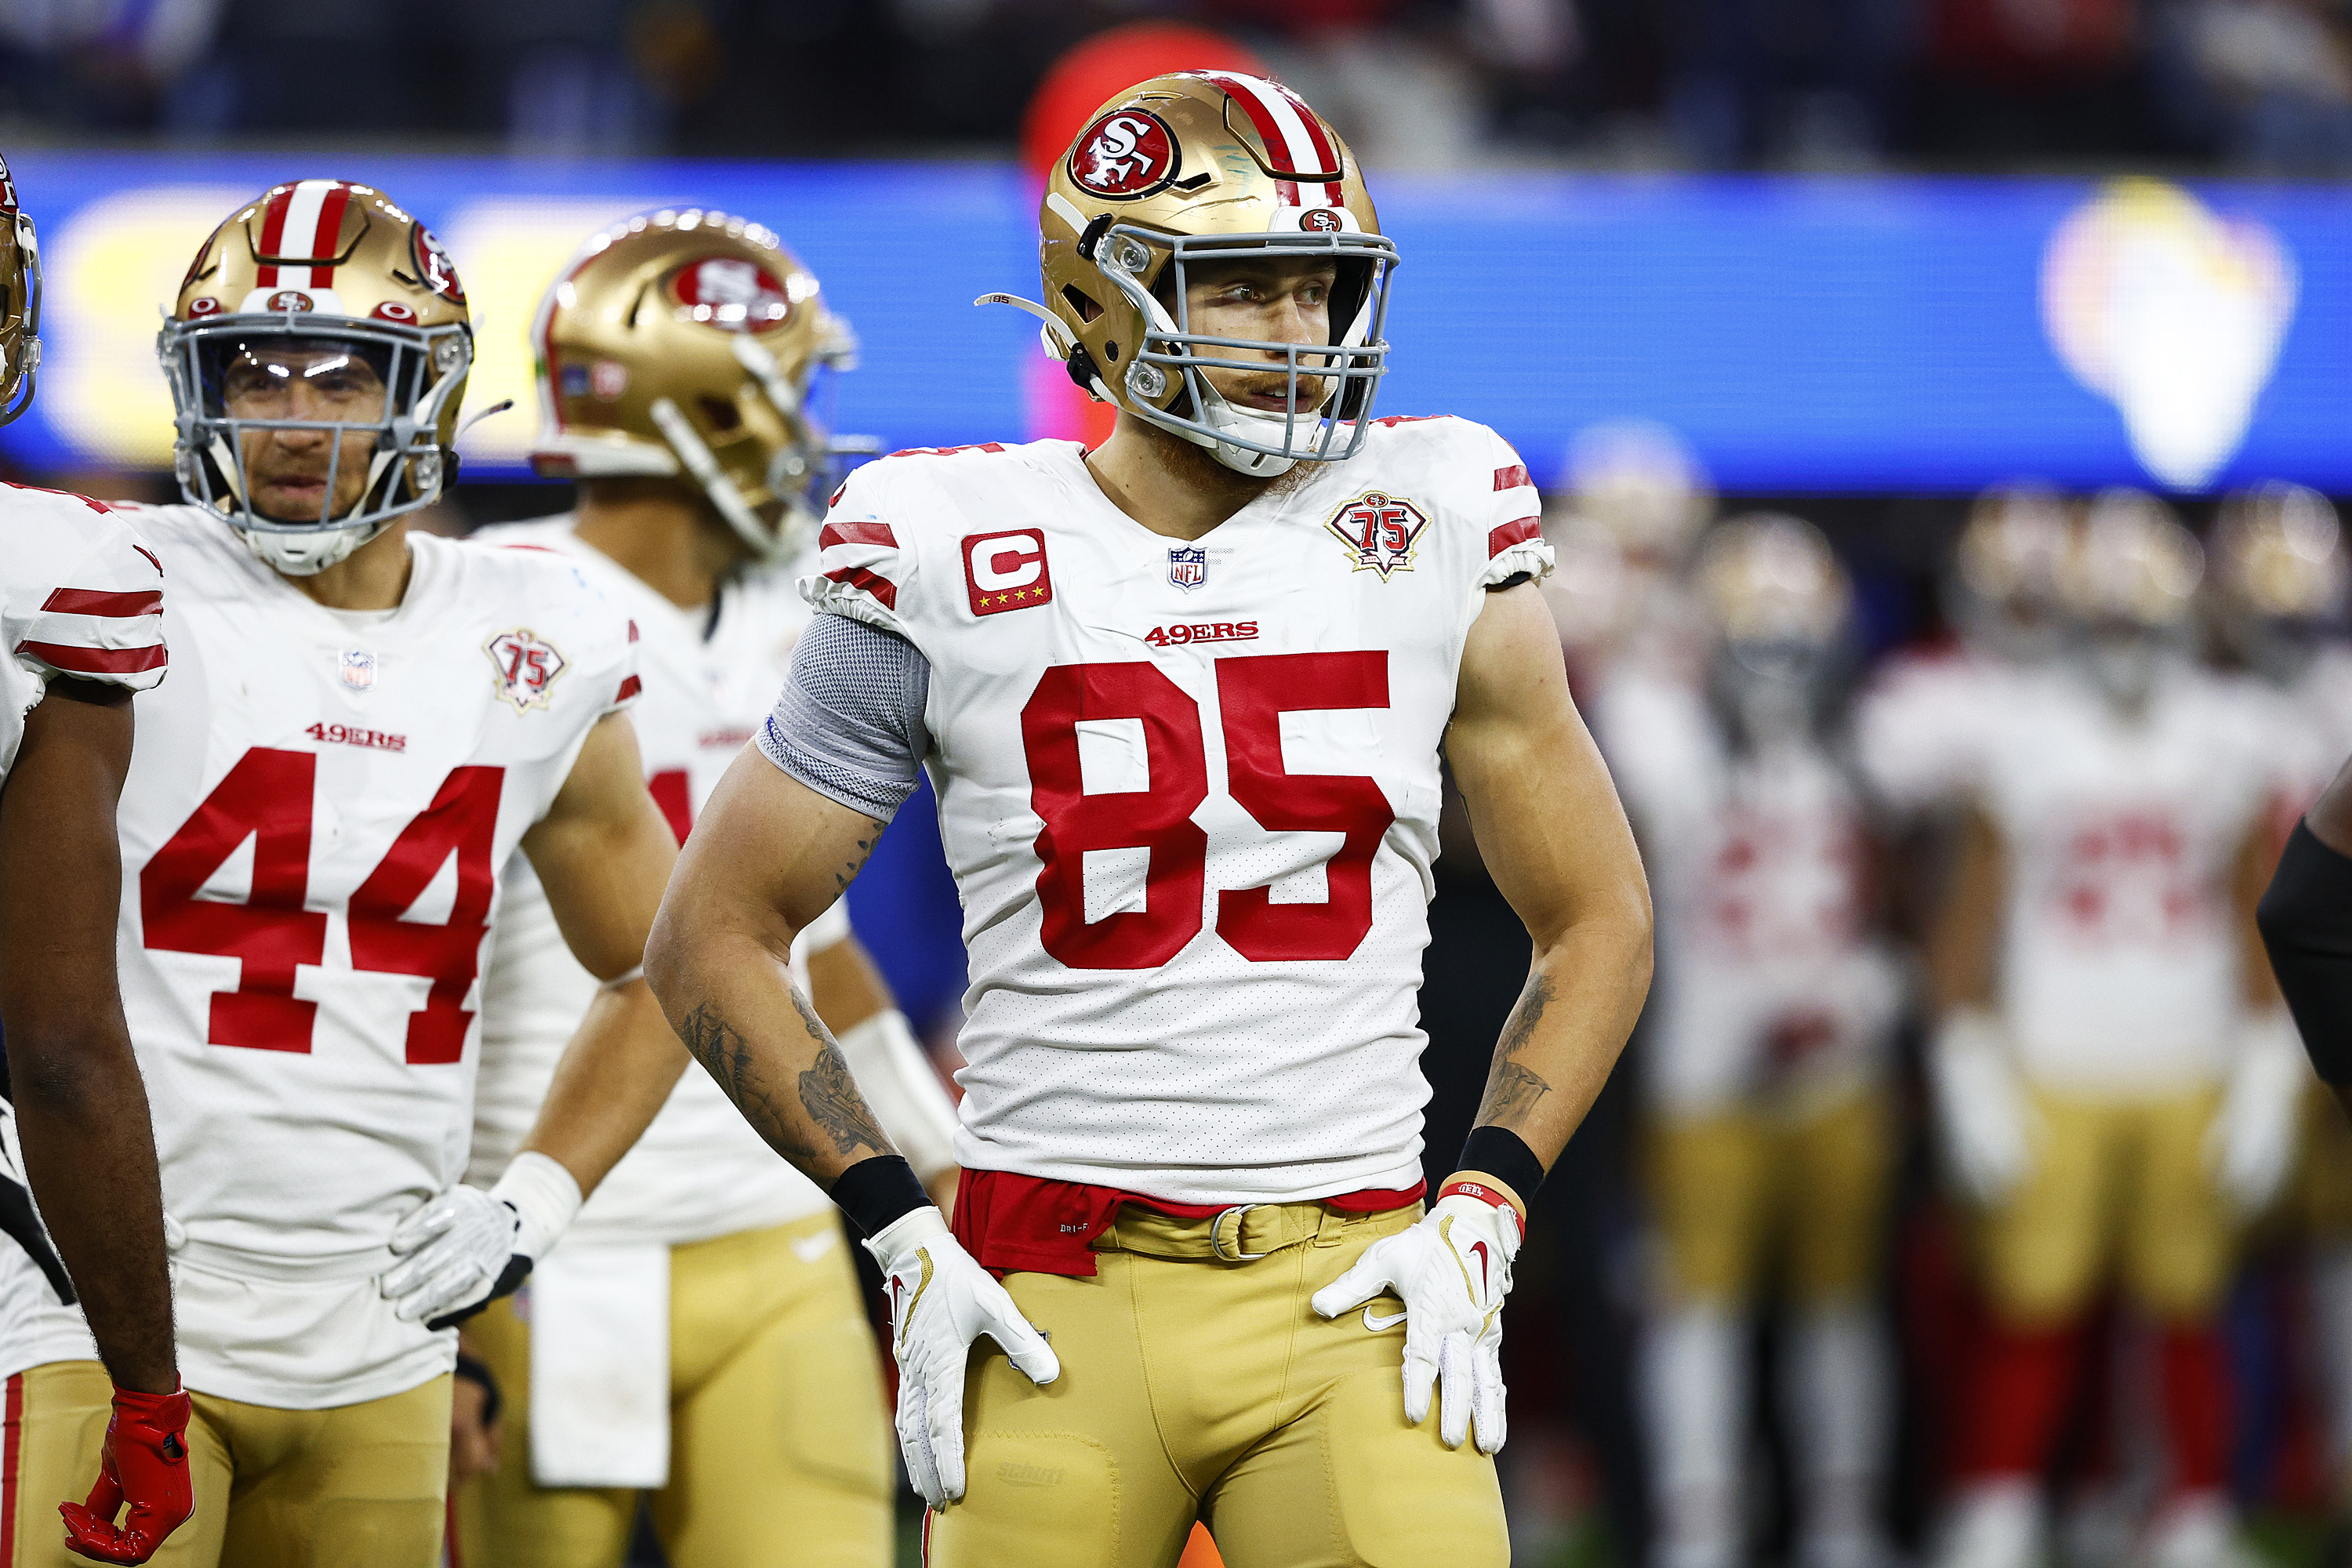 George Kittle #85 of the San Francisco 49ers reacts during the game against the Los Angeles Rams in the NFC Championship Game at SoFi Stadium on January 30, 2022 in Inglewood, California.